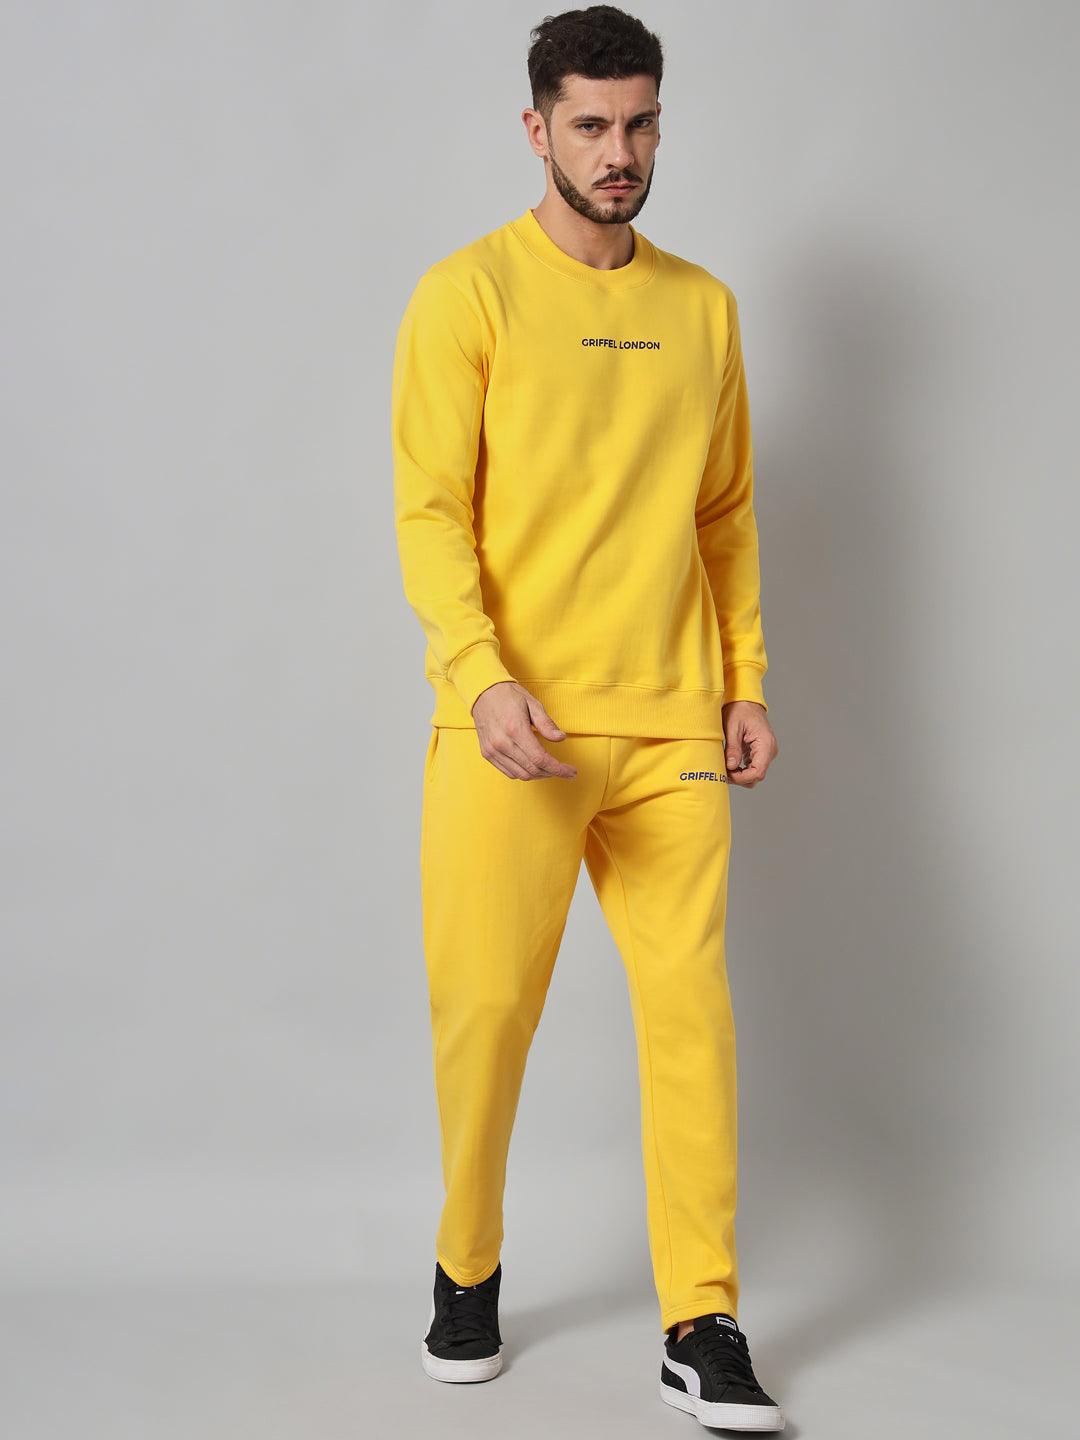 Griffel Men's Front Logo Solid Fleece Basic R-Neck and Joggers Full set Yellow Tracksuit - griffel